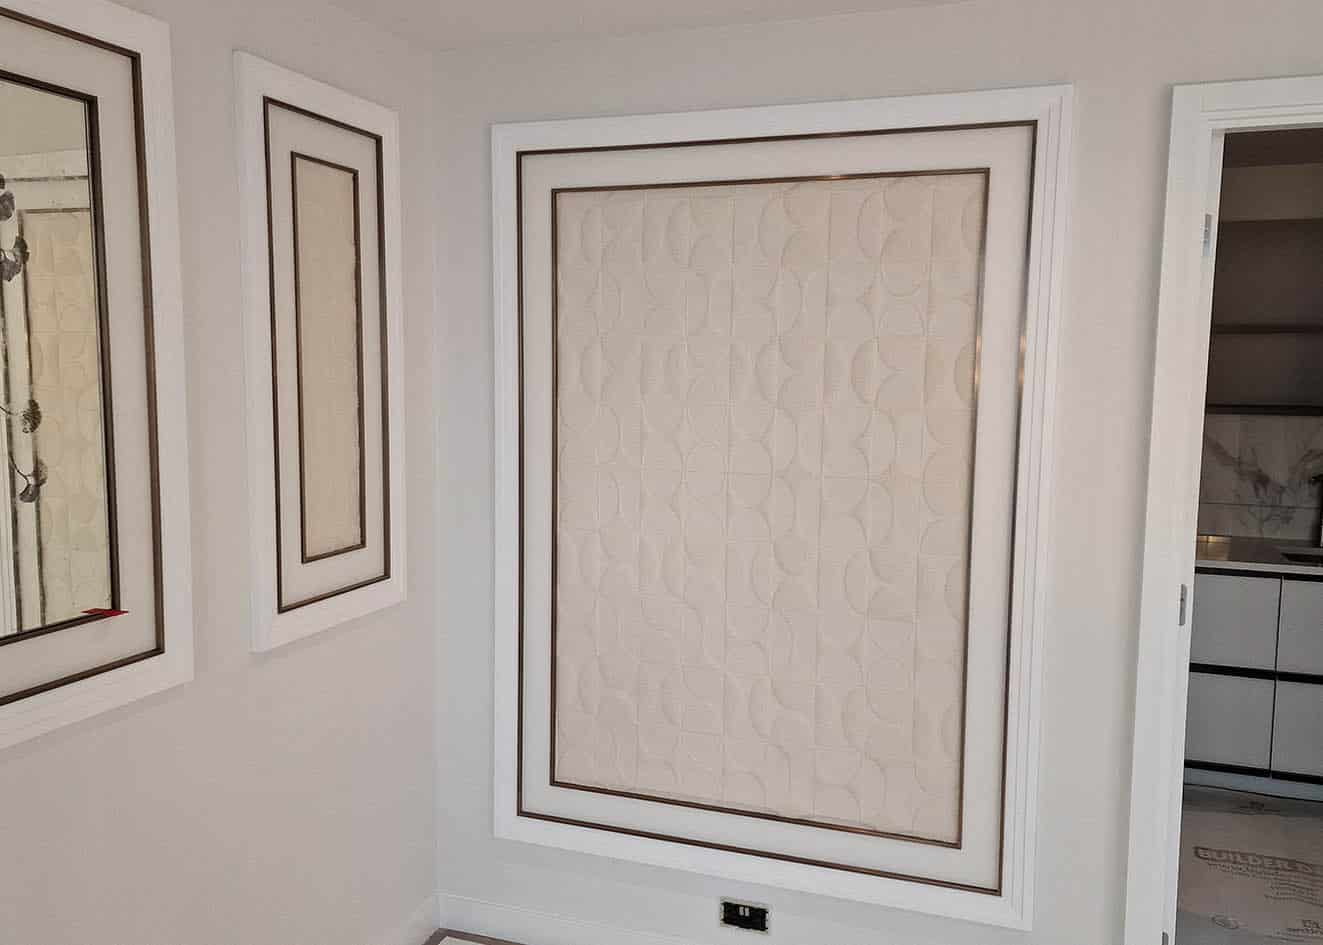 Arte Curve wallpaper installed in frames. The wallpaper is white and patterned. There are two frames ,one of them is larger and a mirror decorated with flowers and butterflies in dark grey on the reflective part.